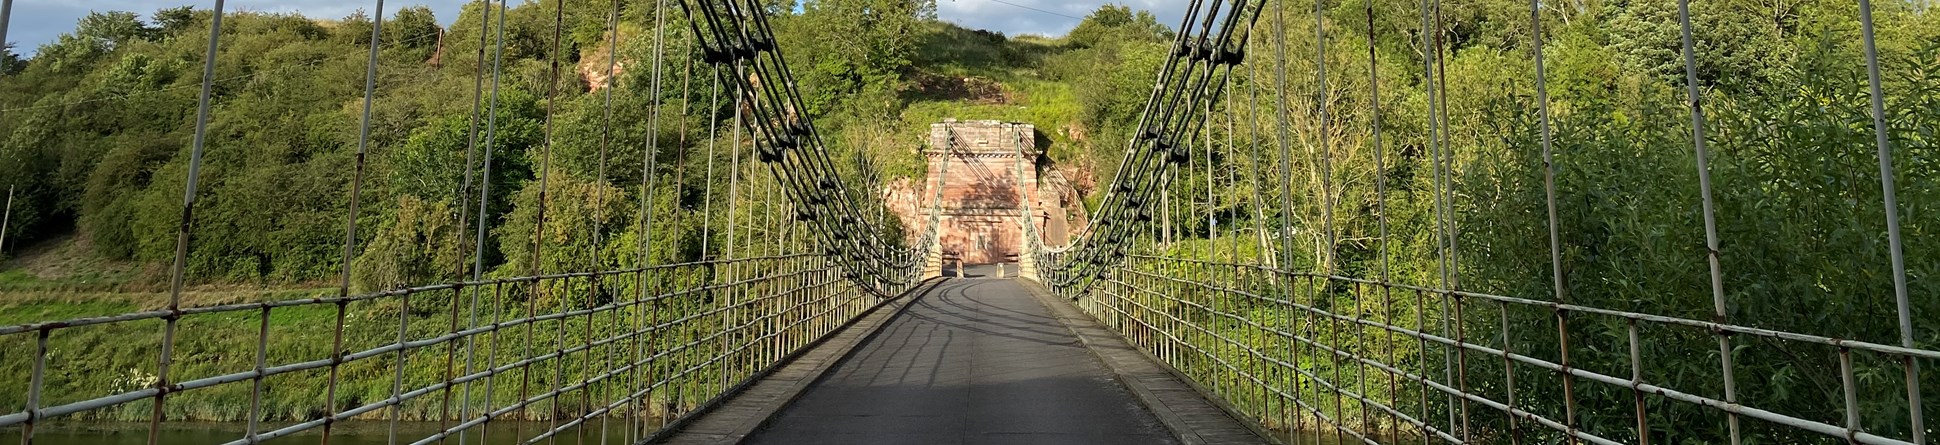 Union Chain Bridge. View from Scottish side towards England.